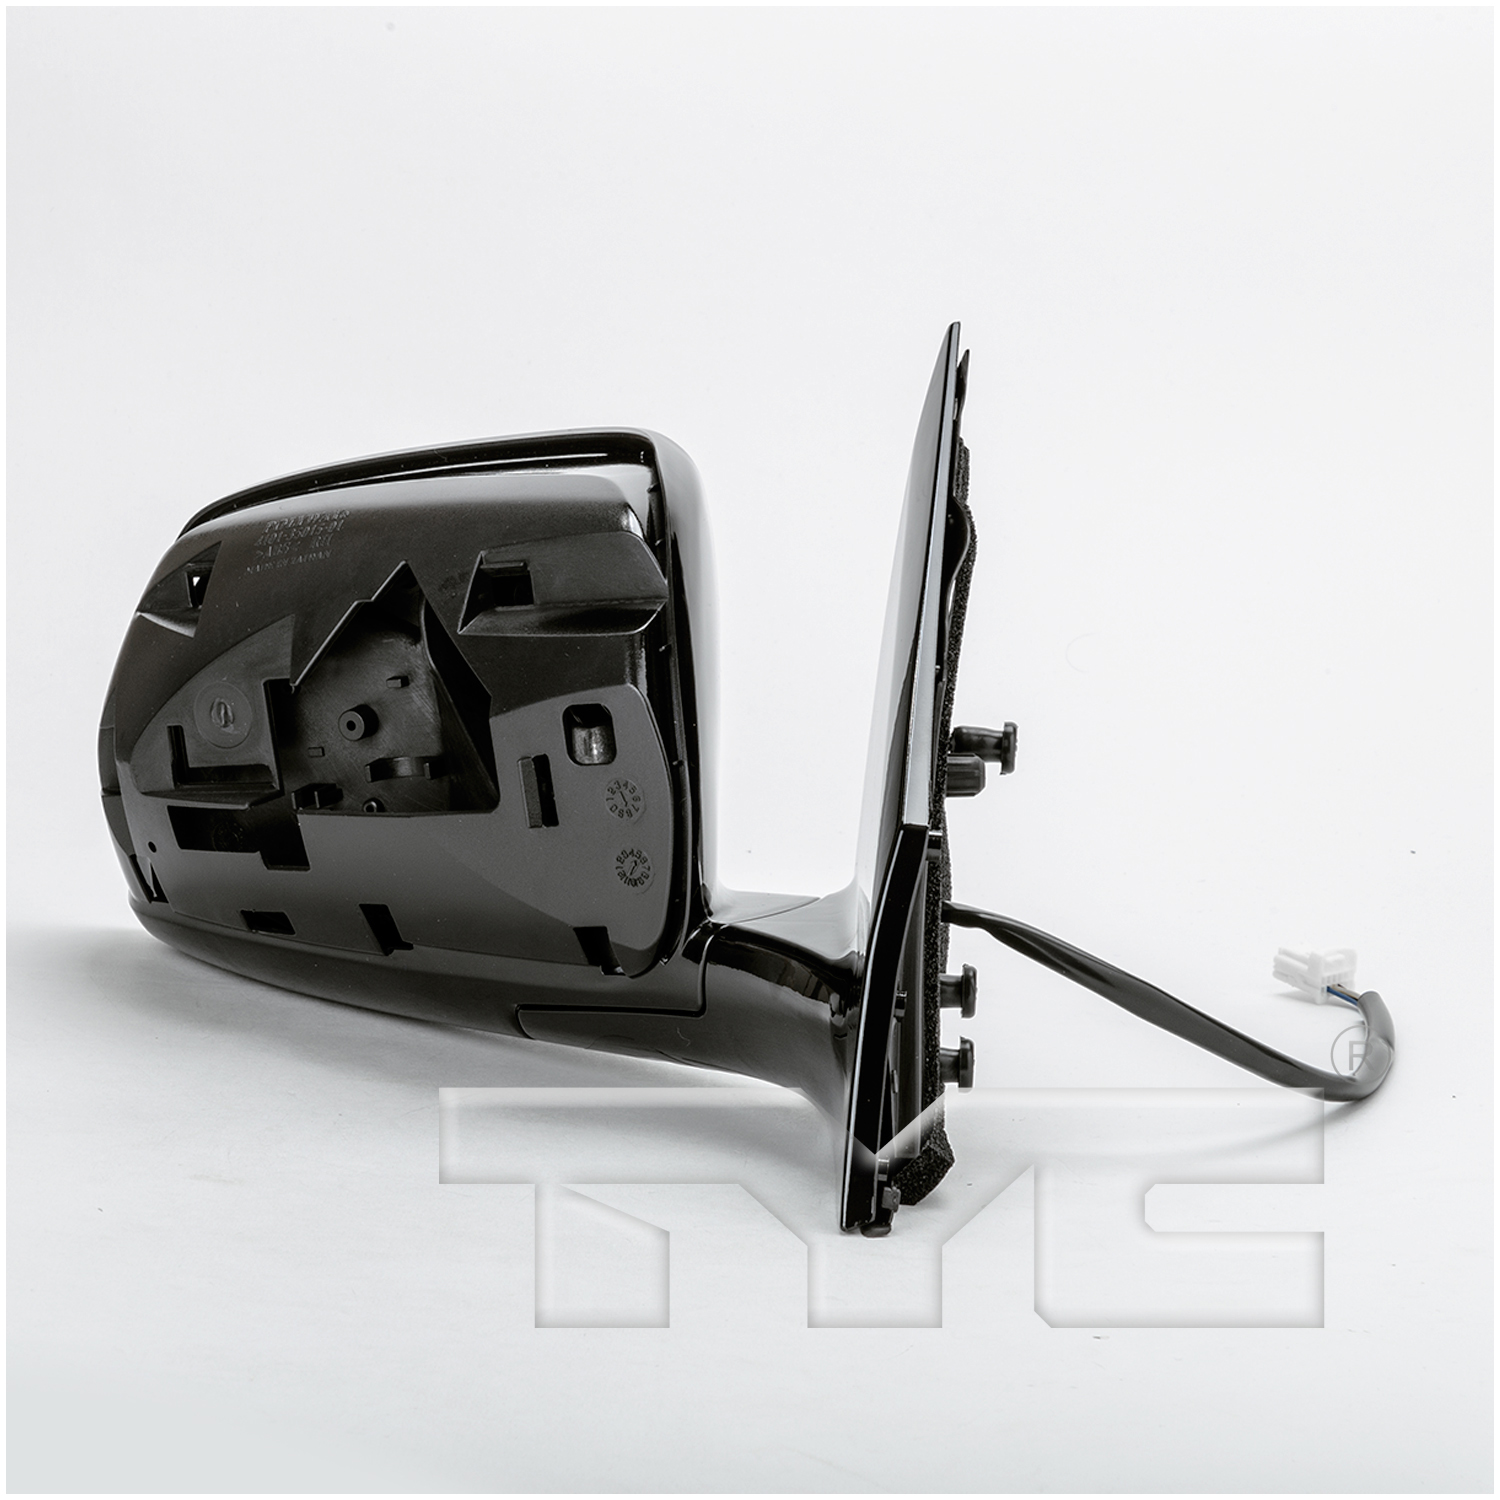 Aftermarket MIRRORS for NISSAN - MURANO, MURANO,05-08,RT Mirror outside rear view